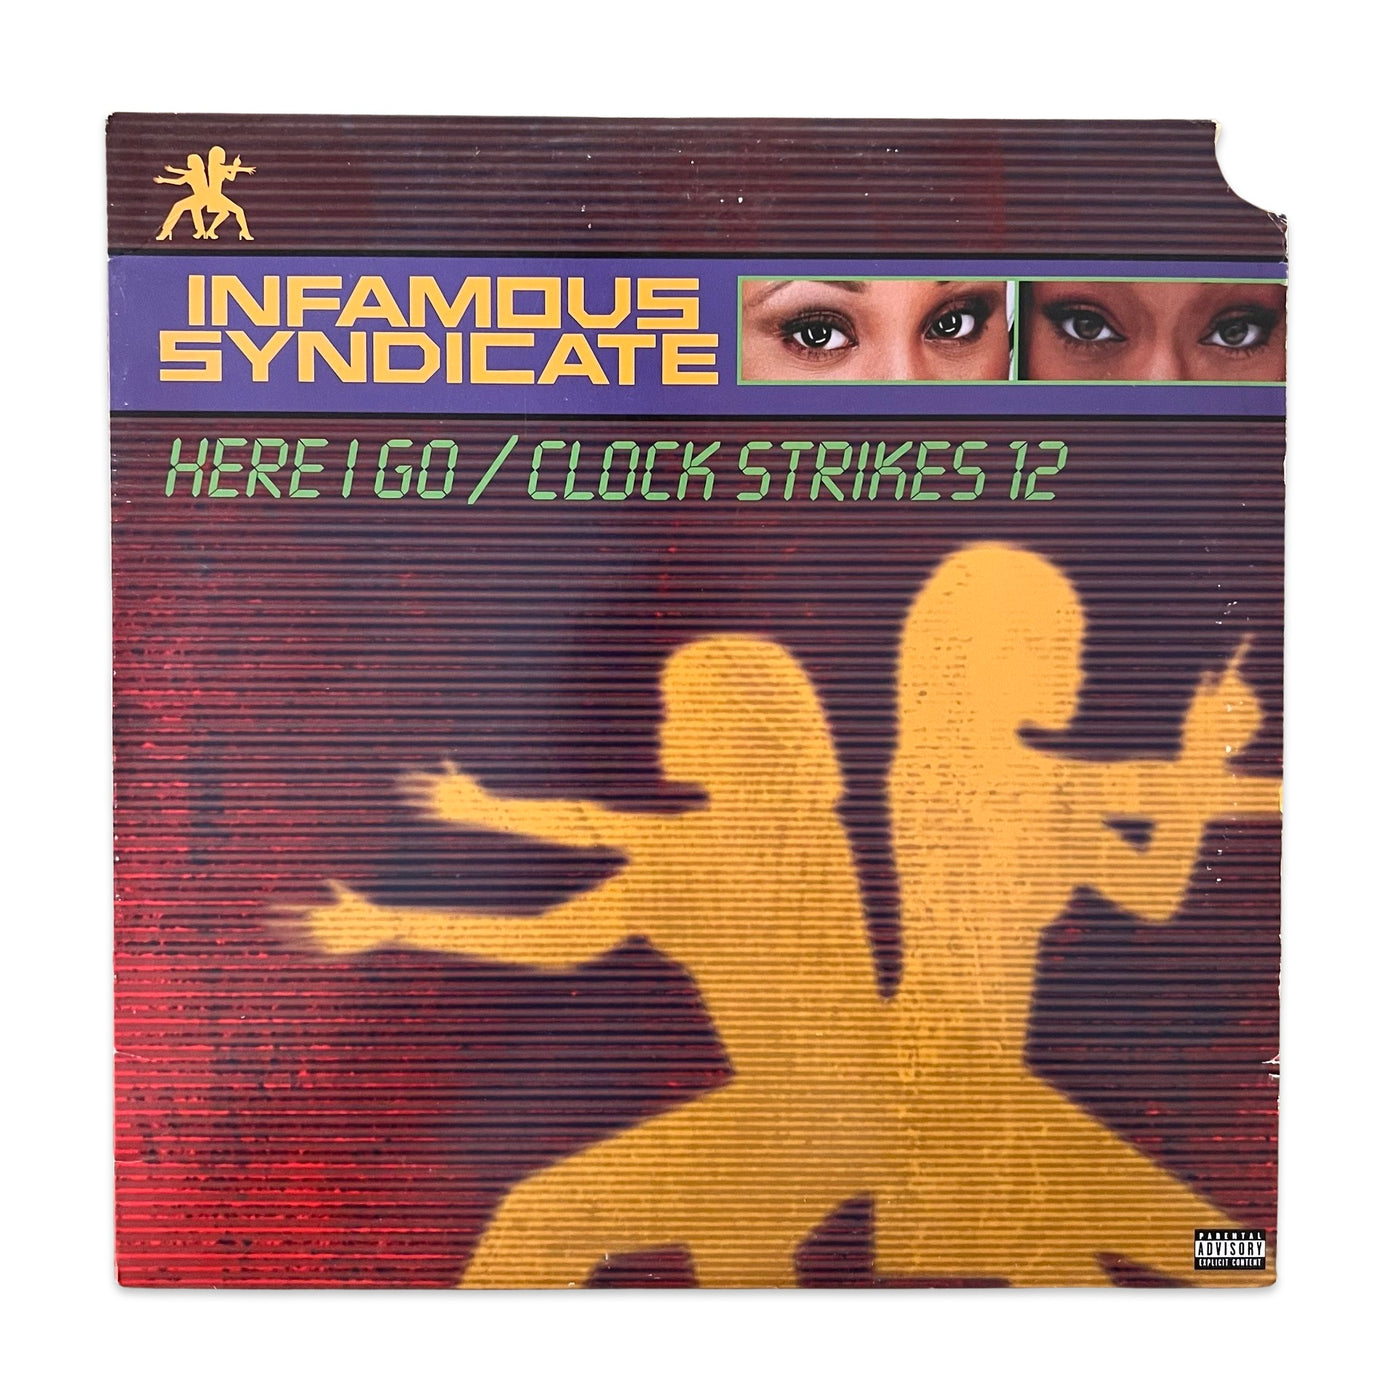 Infamous Syndicate – Here I Go / Clock Strikes 12